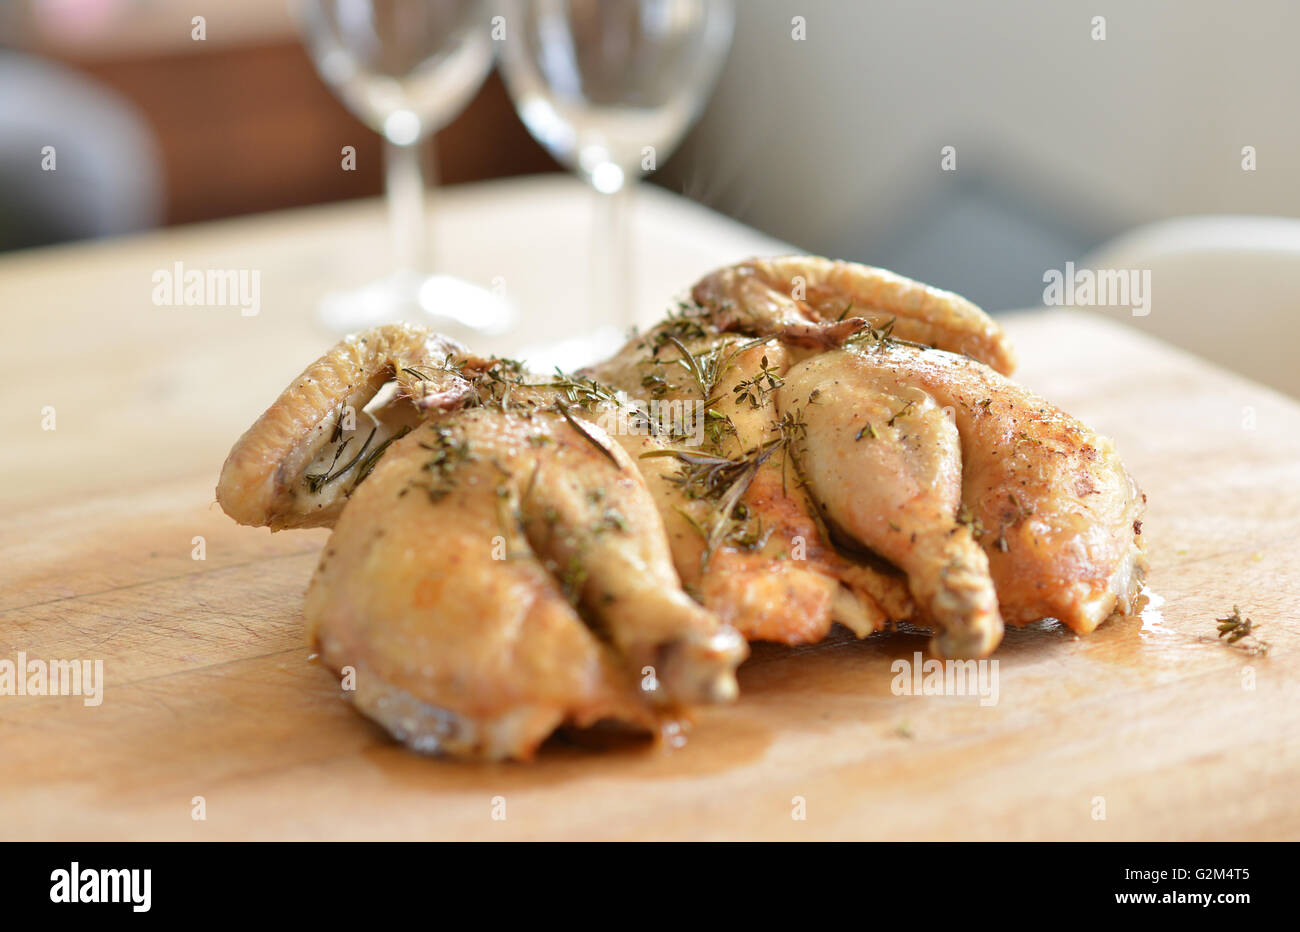 Cooked spatchcock (butterfly) chicken and herbs Stock Photo